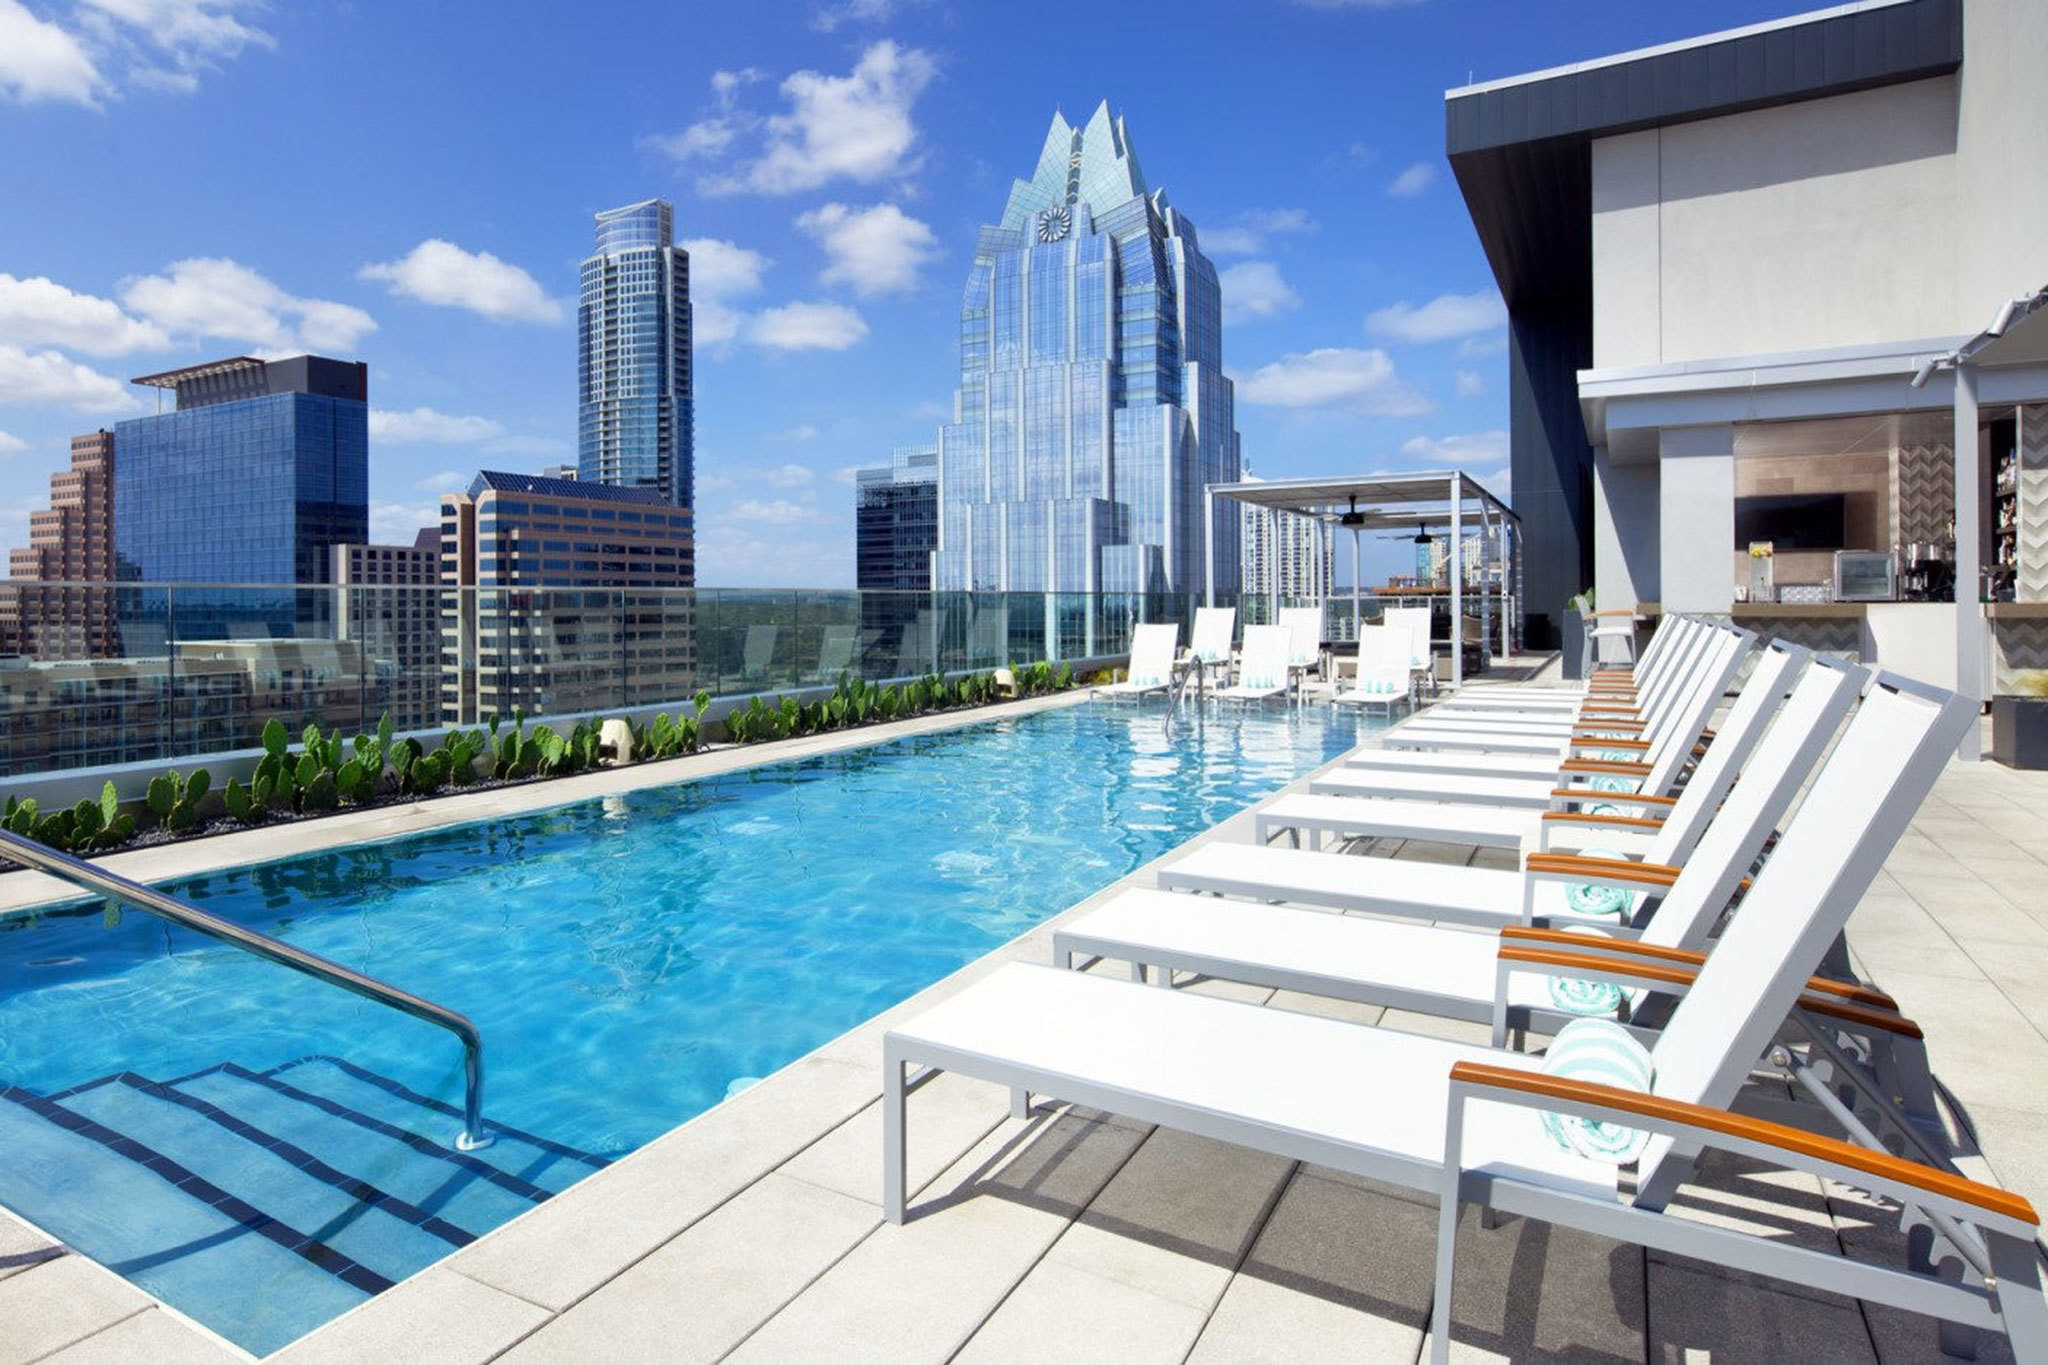 12 Best Rooftop Bars in Austin for Drinks With a View